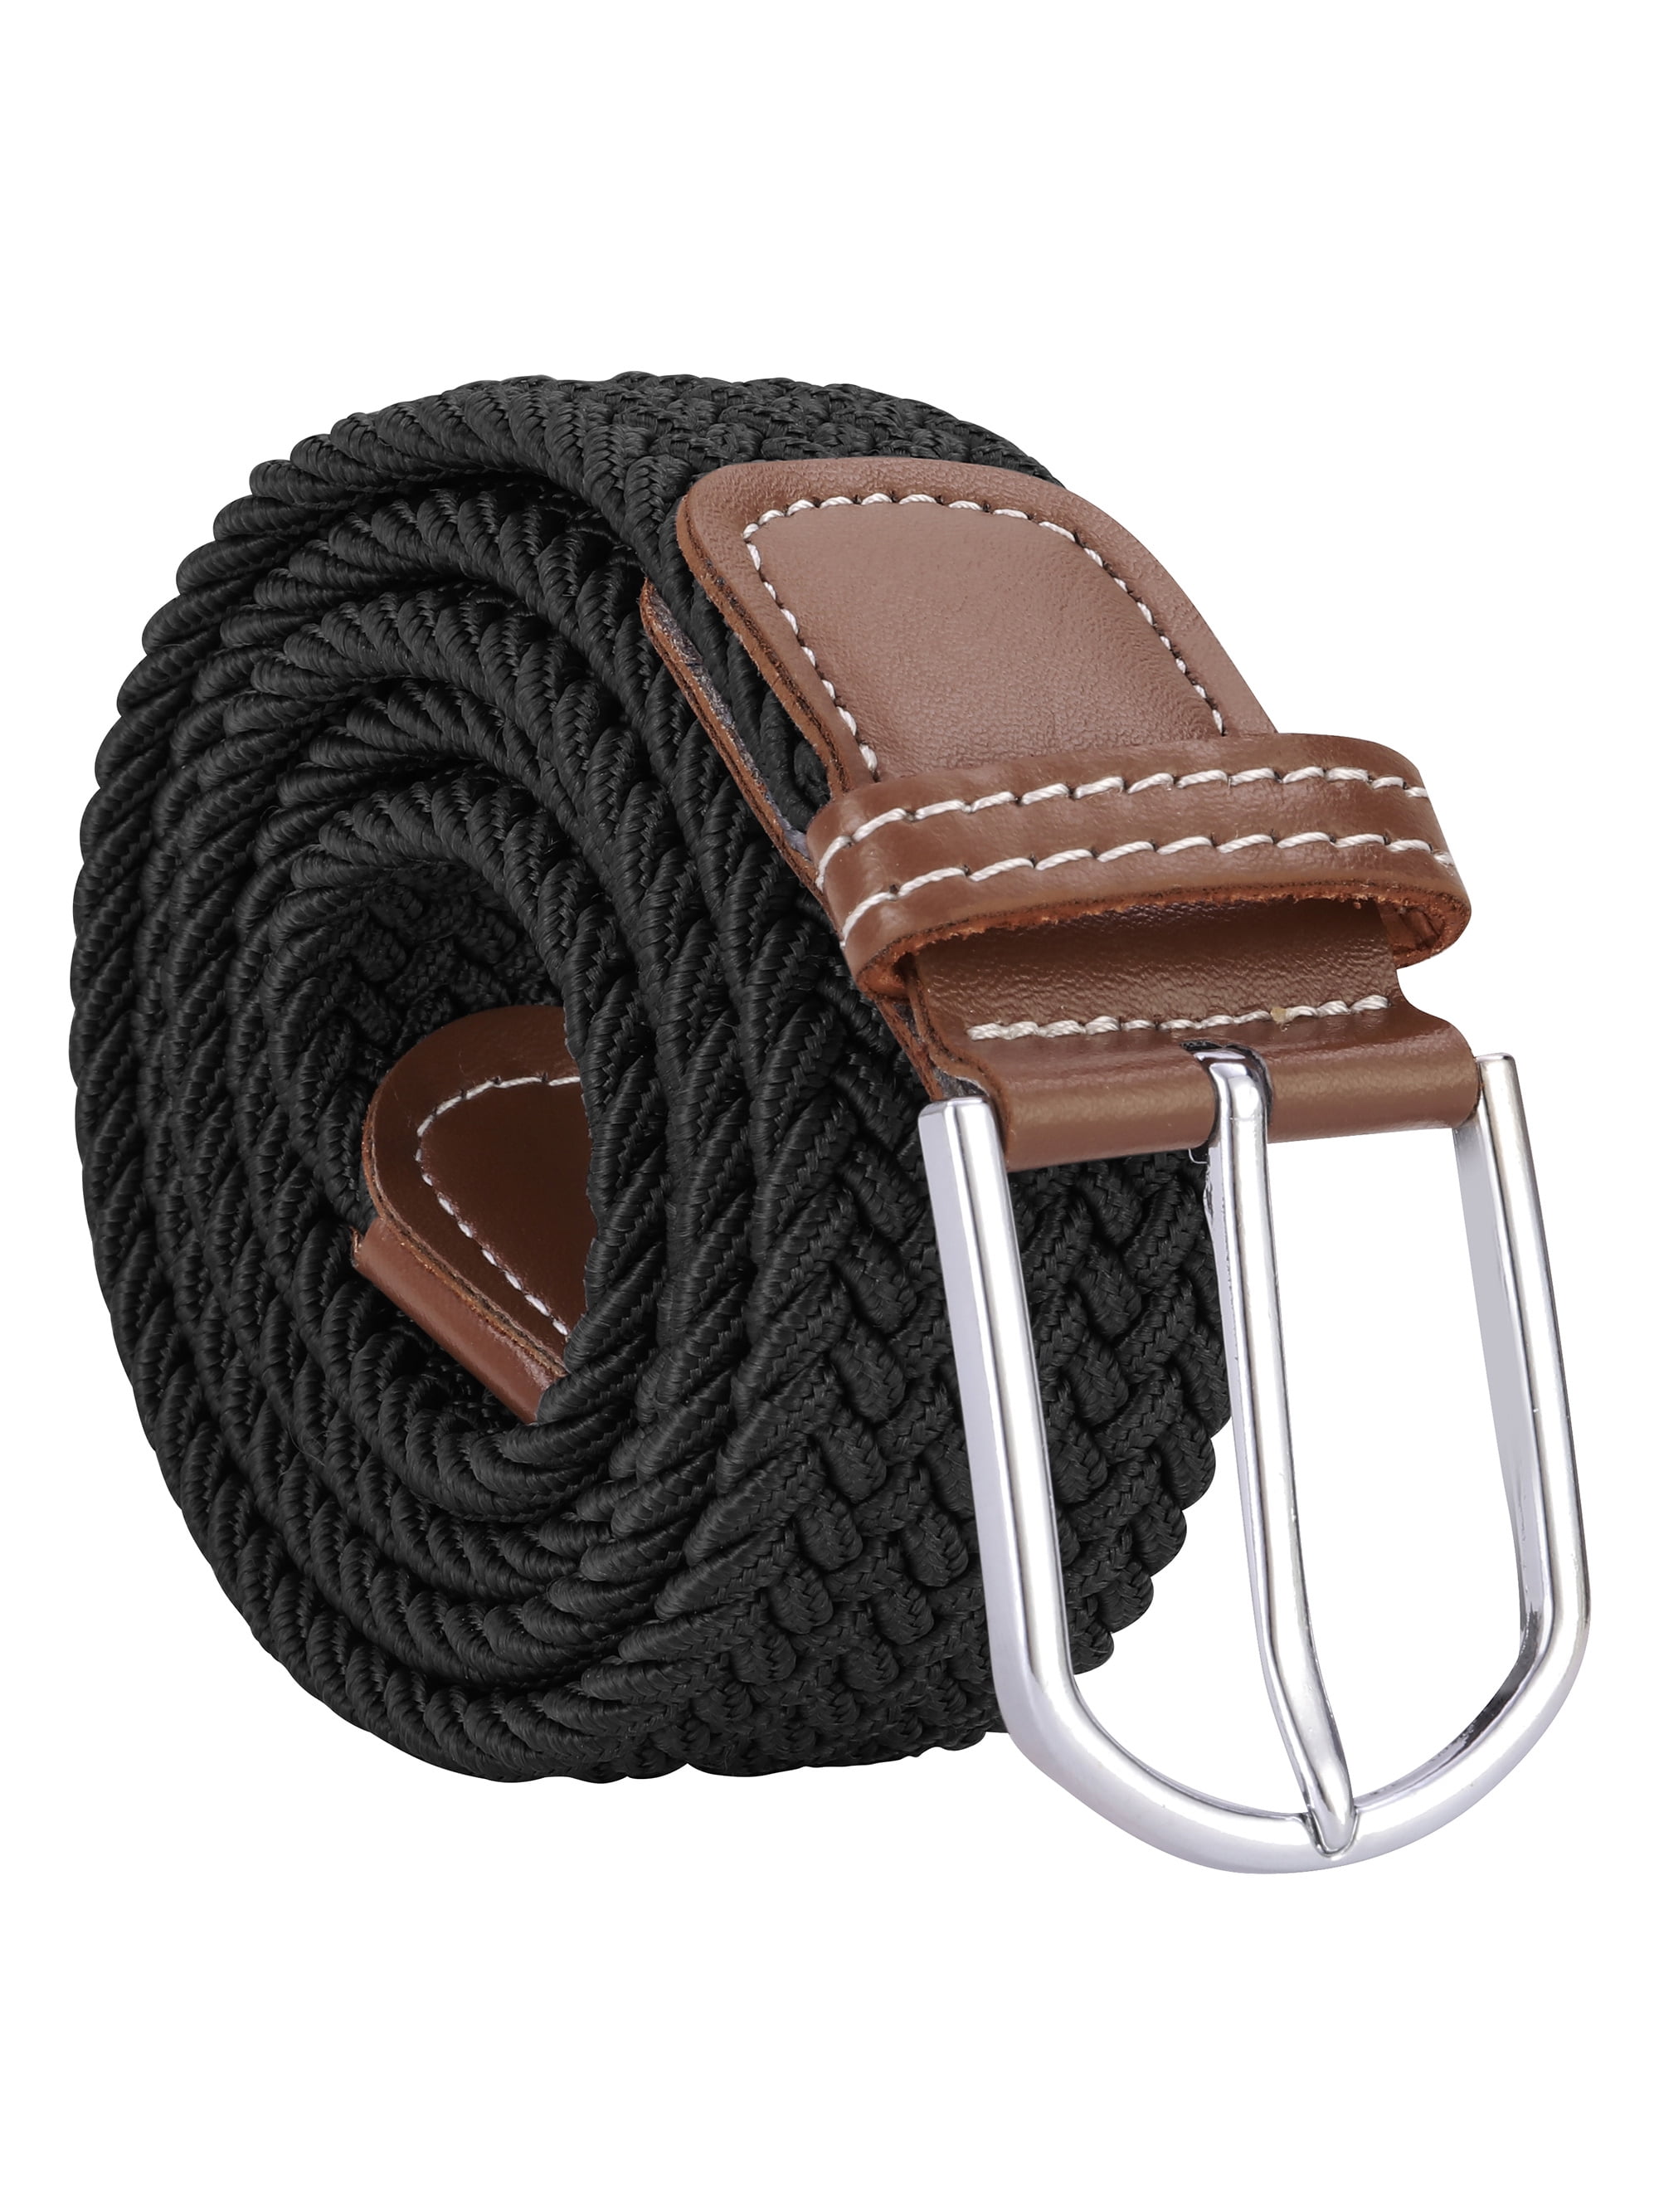 JASGOOD Men's Braided Leather Belt, Braided Woven Belt for Men Casual Jeans  with Solid Strap Single Prong Buckle (A-Brown, Suit for Pant Size  26''-31'') at  Men's Clothing store